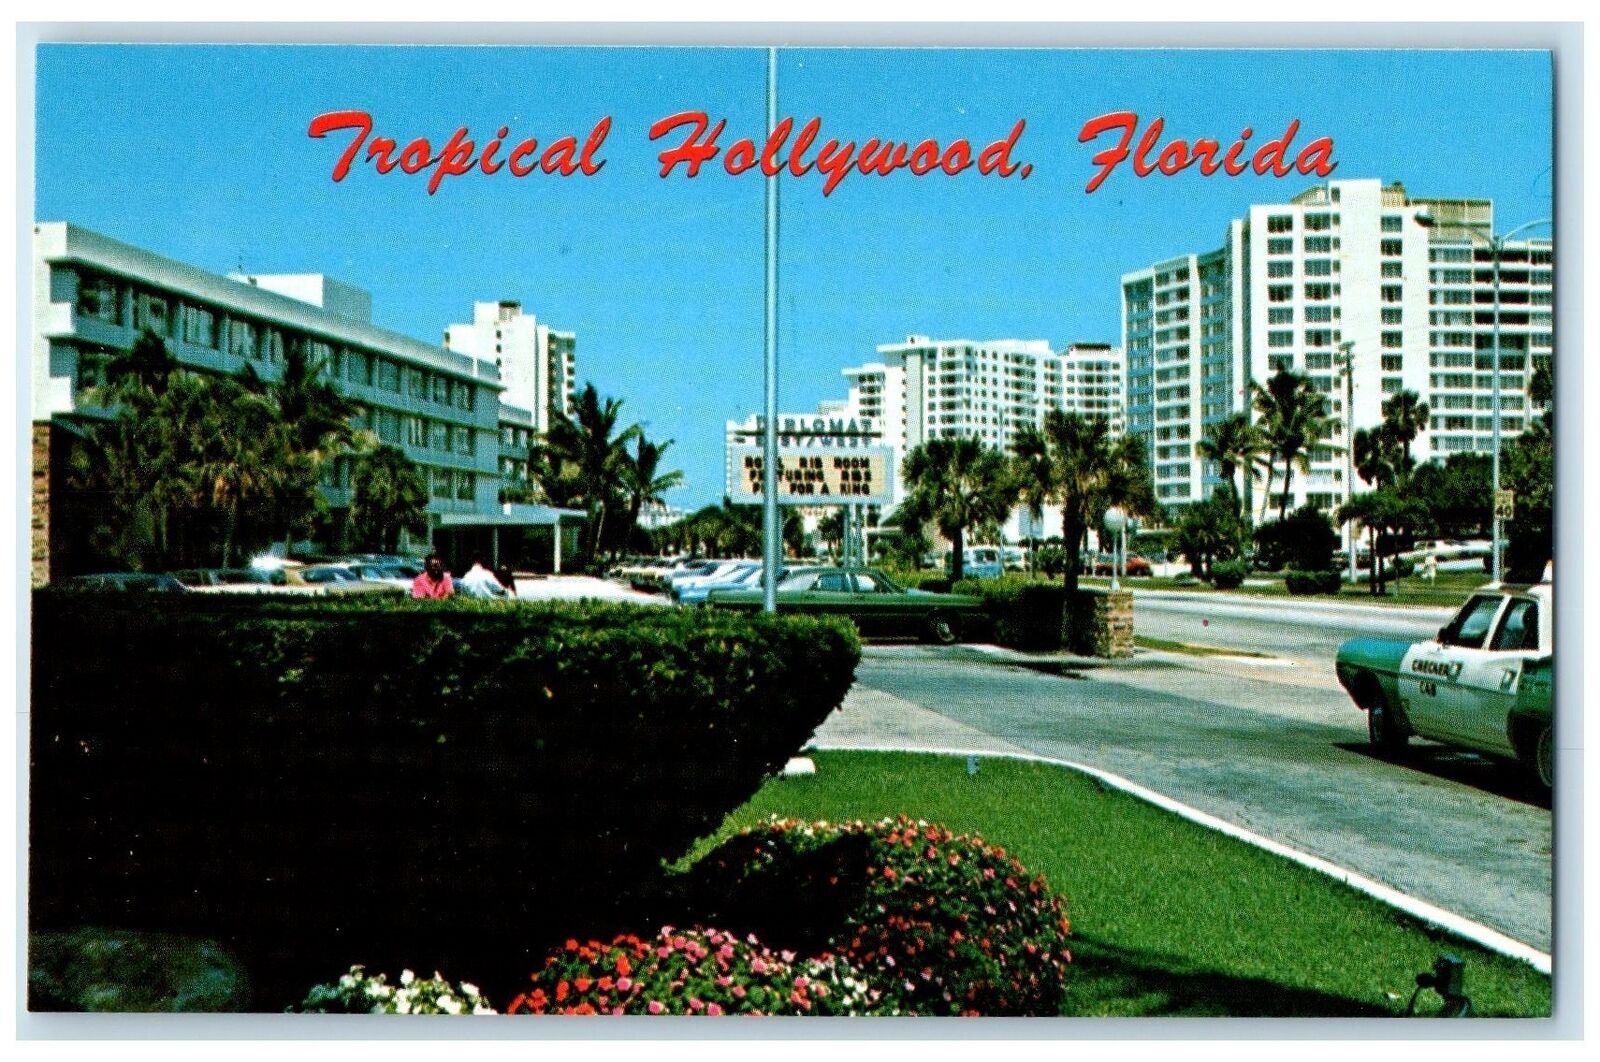 c1950 Tropical Hollywood Luxurious Hotels Apartment Houses Florida FL Postcard